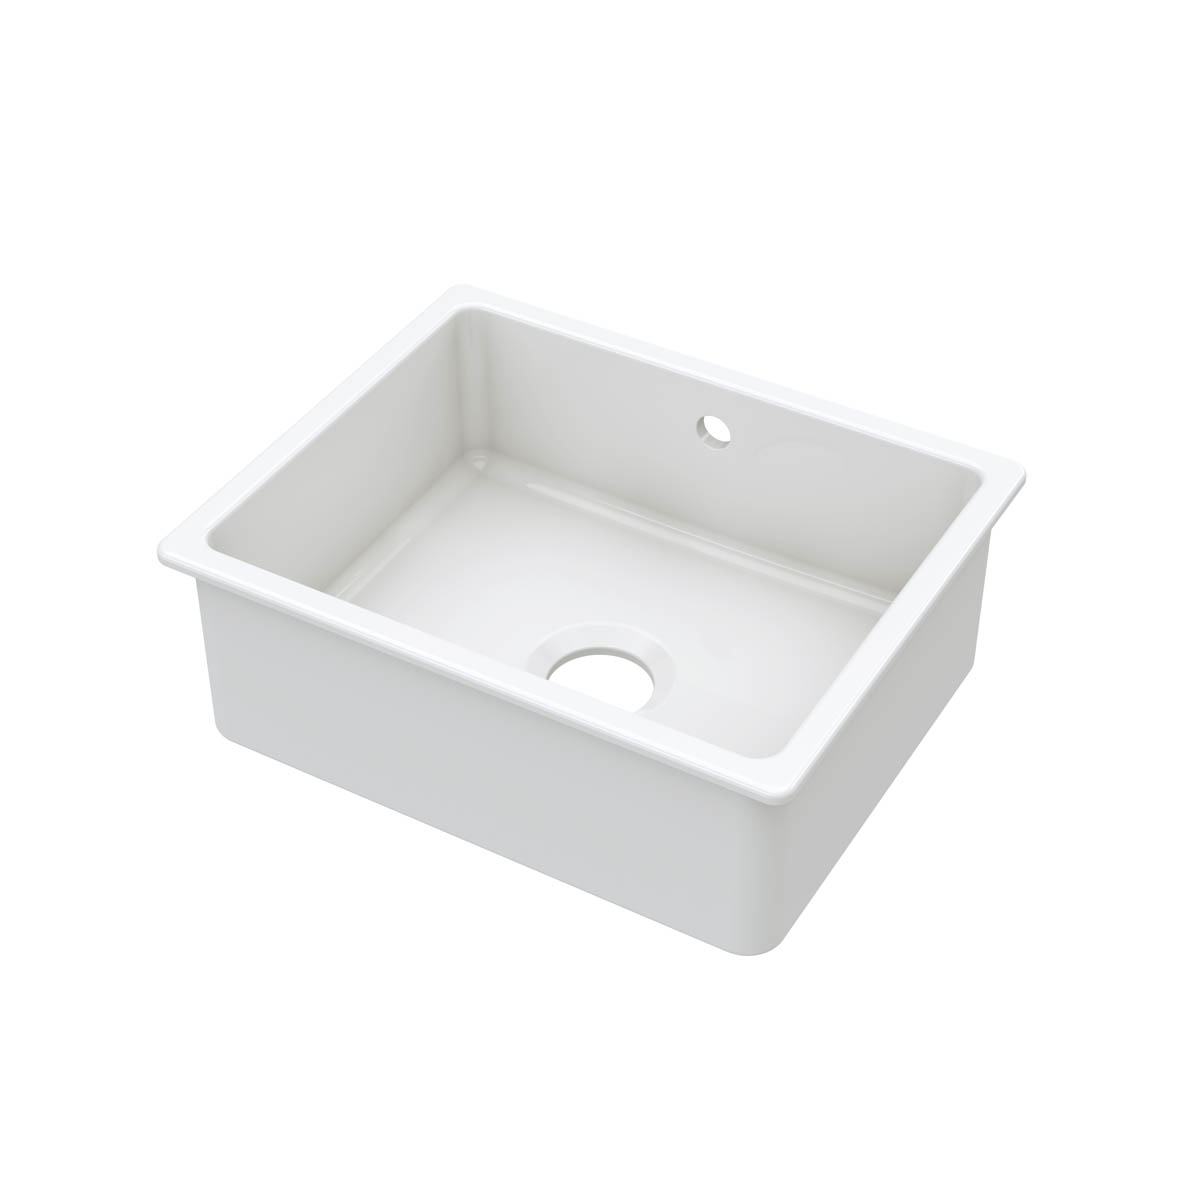 Nuie 548x442x197mm Inset or Undermount Sink with 90mm Central Waste & Overflow - White (20319)